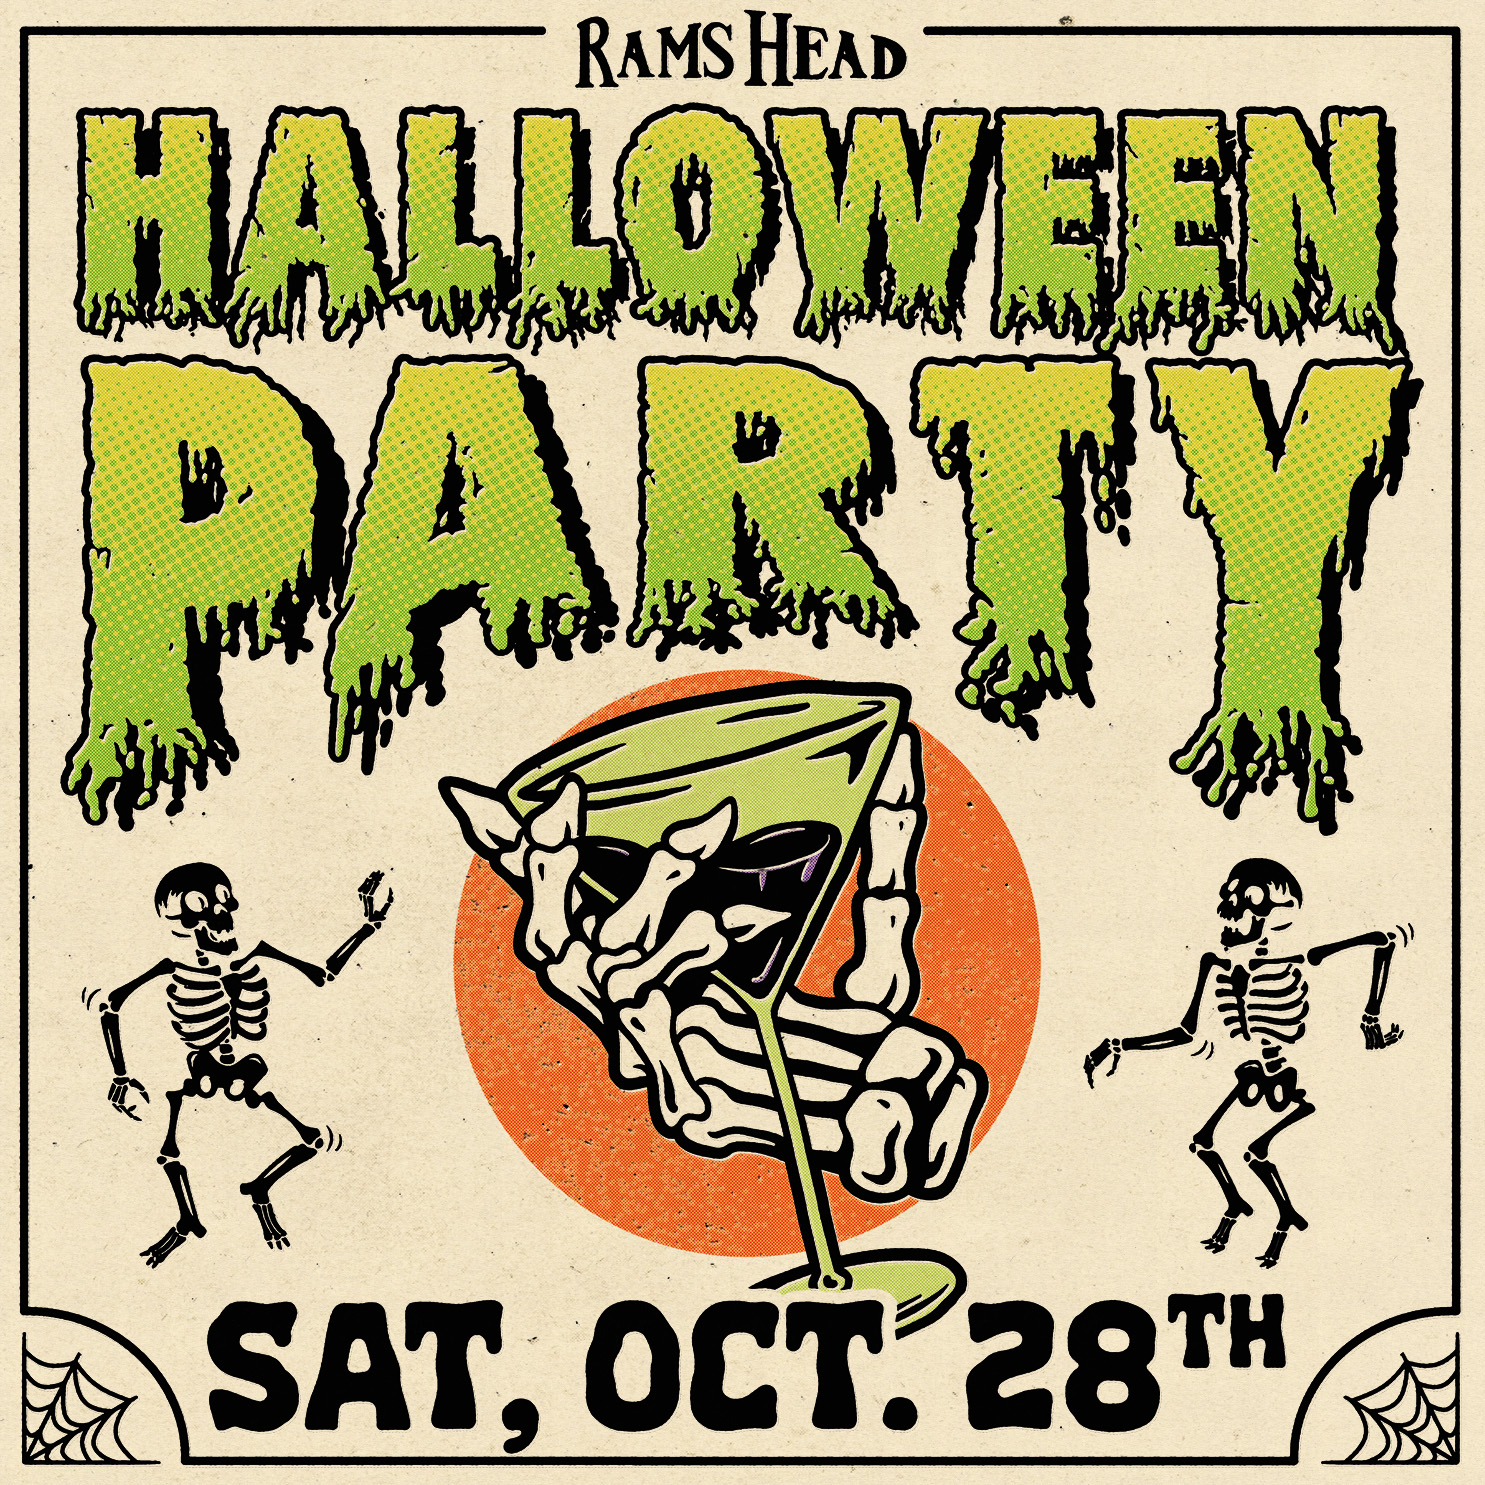 Halloween Party at Rams Head